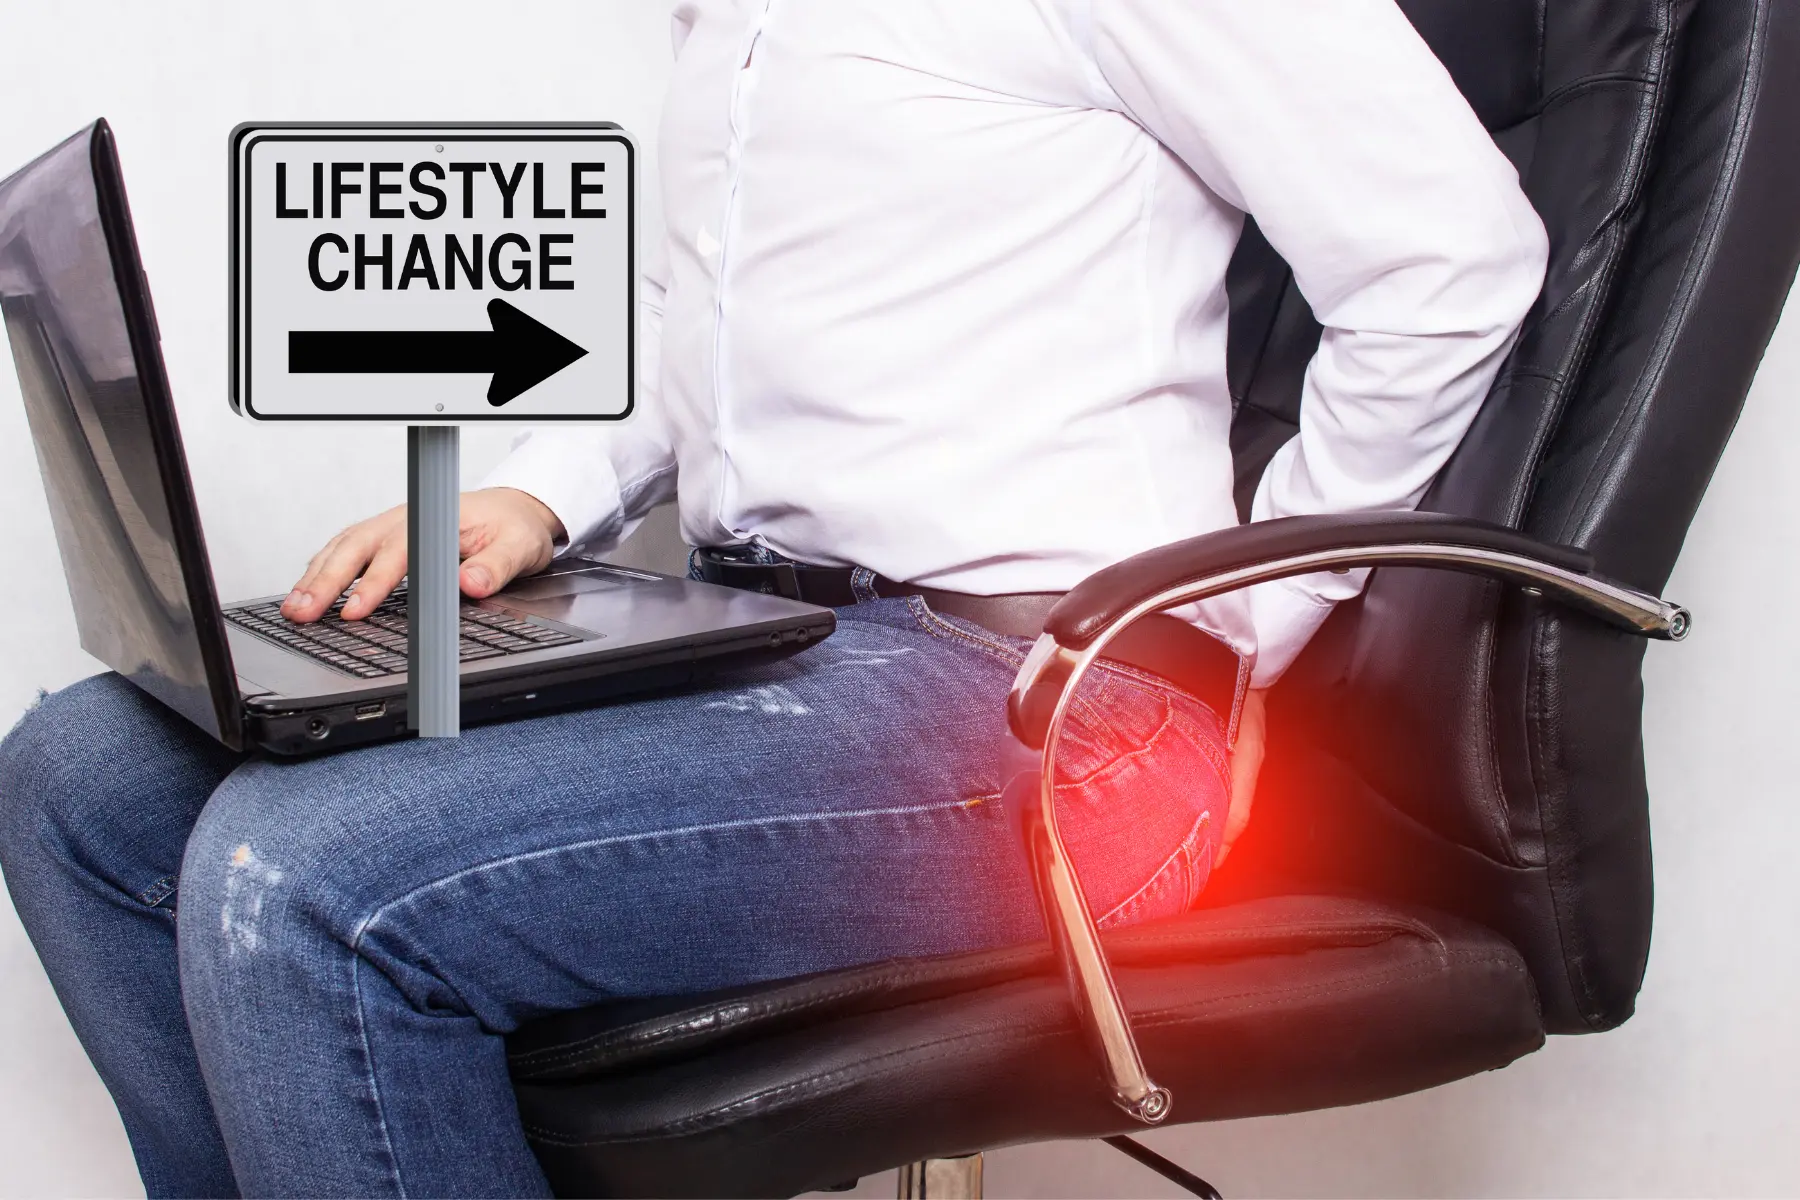 Man seating on a chair holding his bottom from pain from hemorrhoids, and a sign for lifestyle change with a right facing arrow